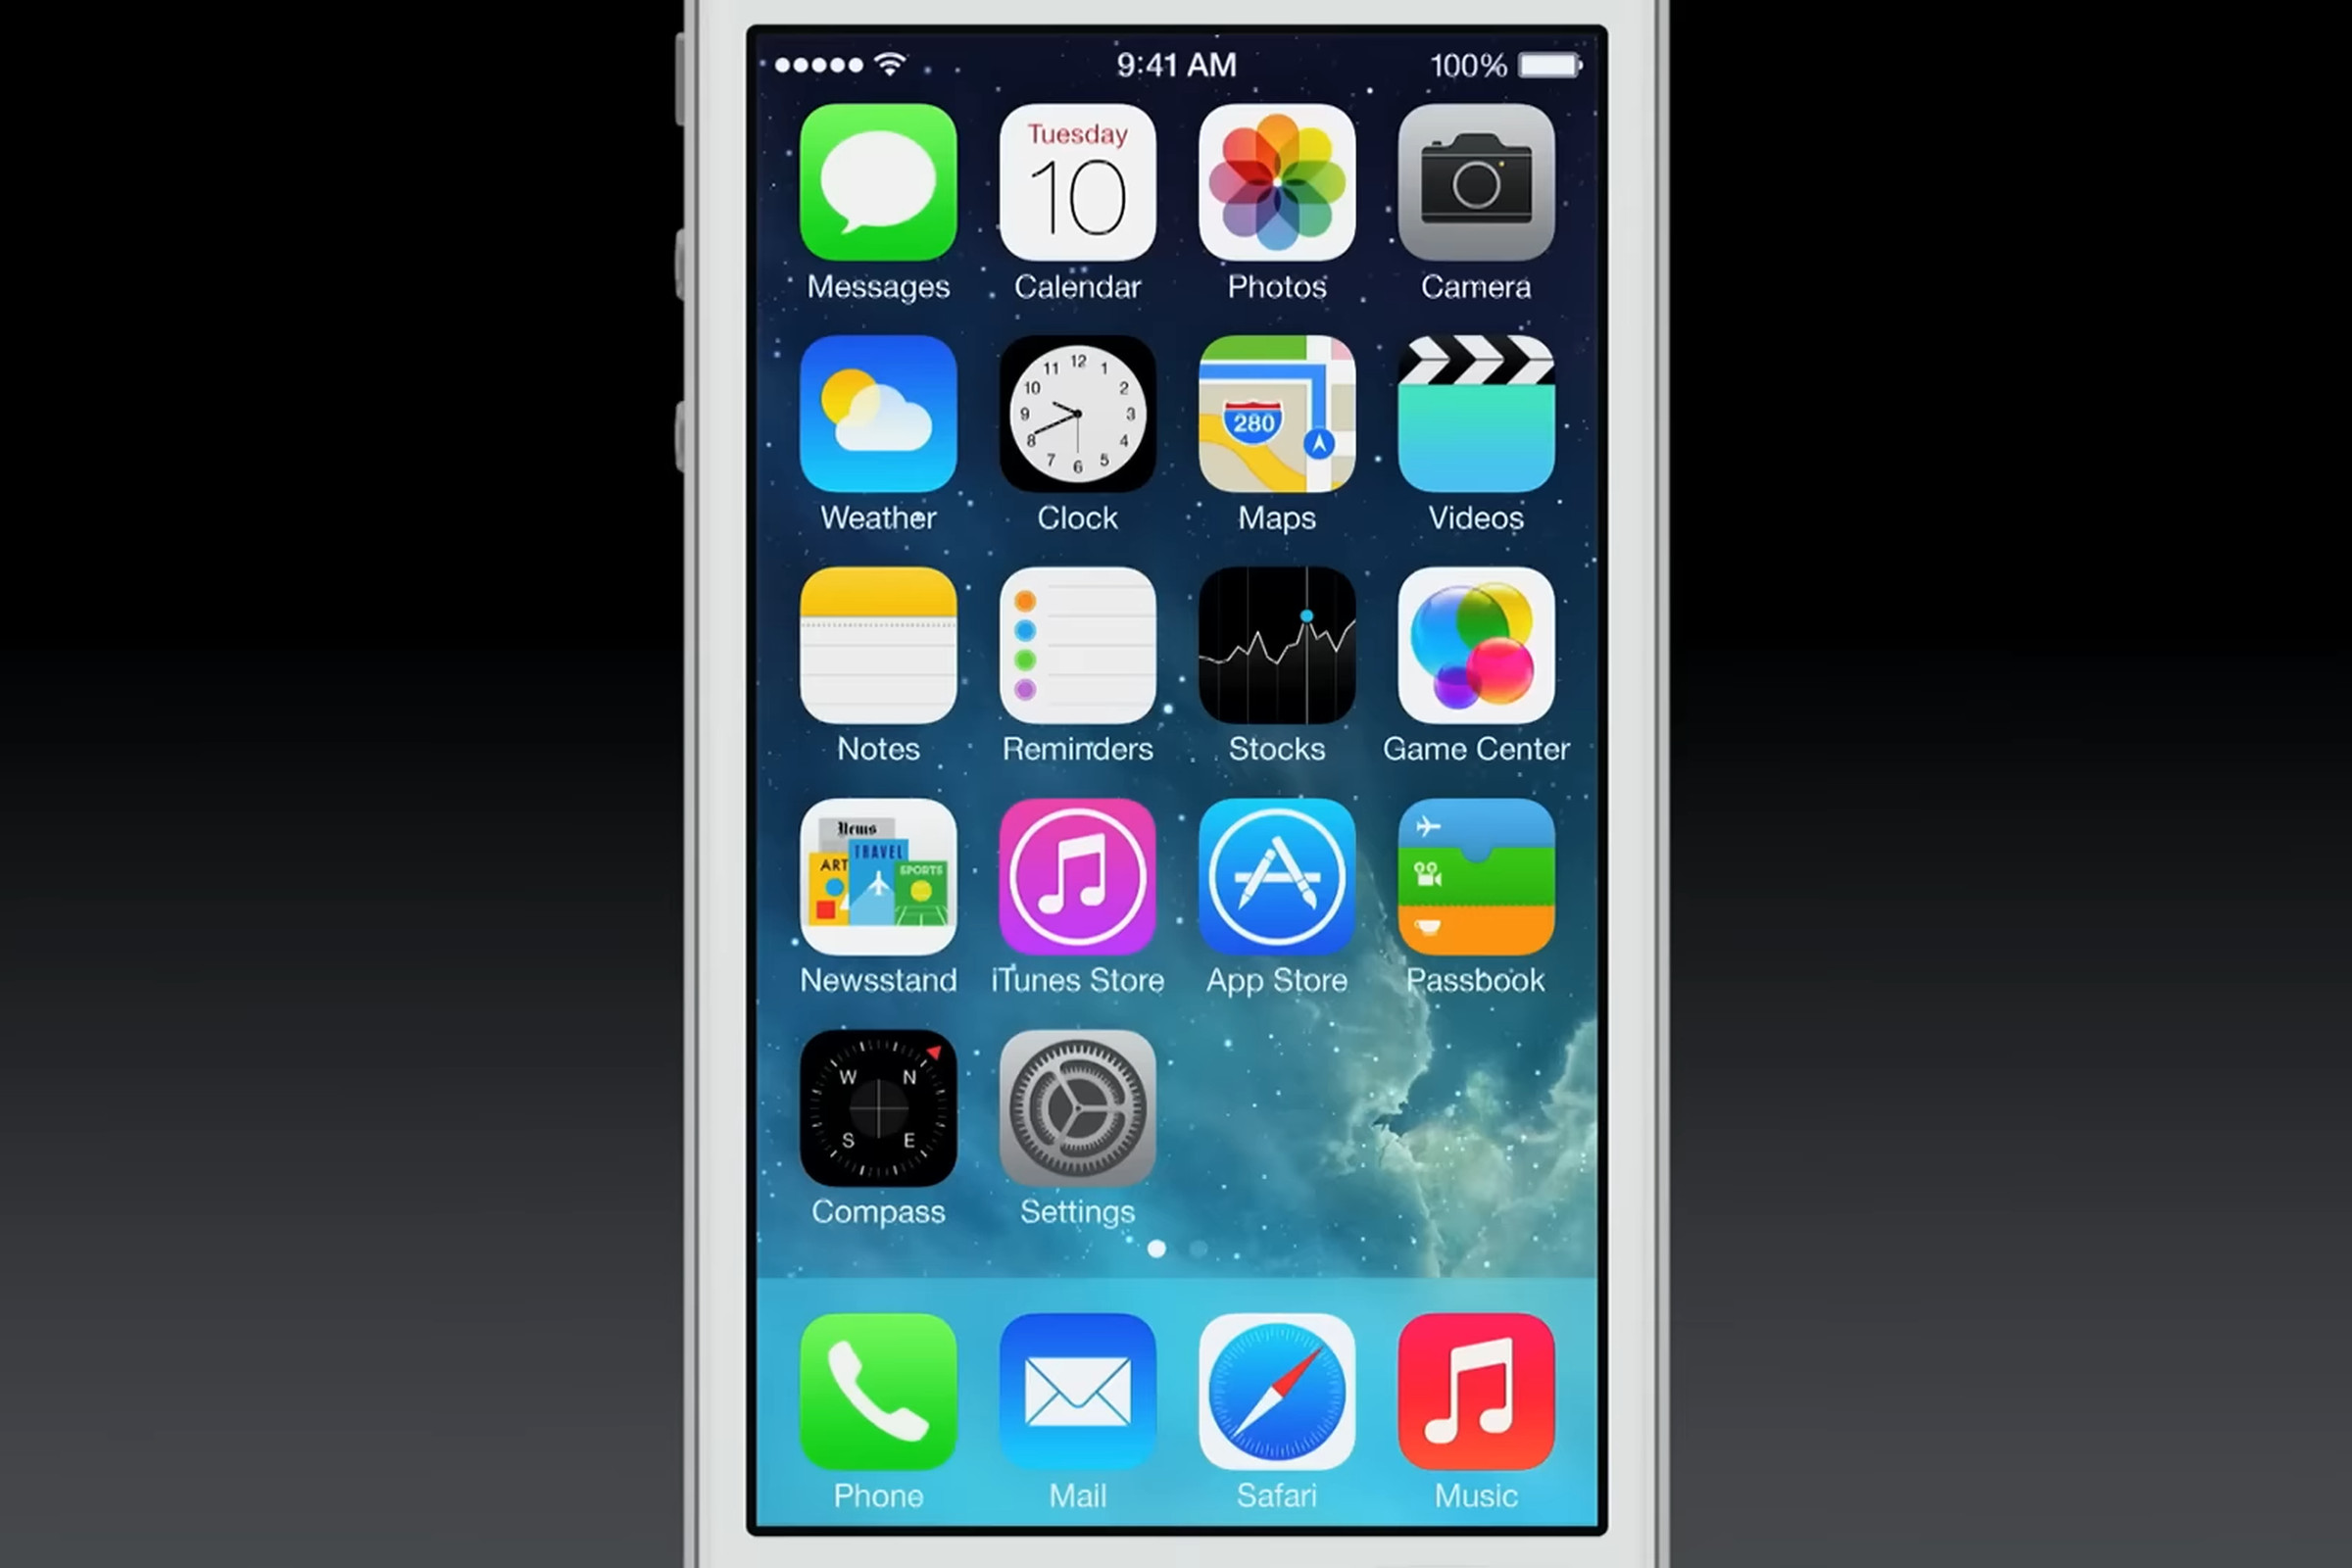 An image of iOS 7 from Apple’s September 2013 event.